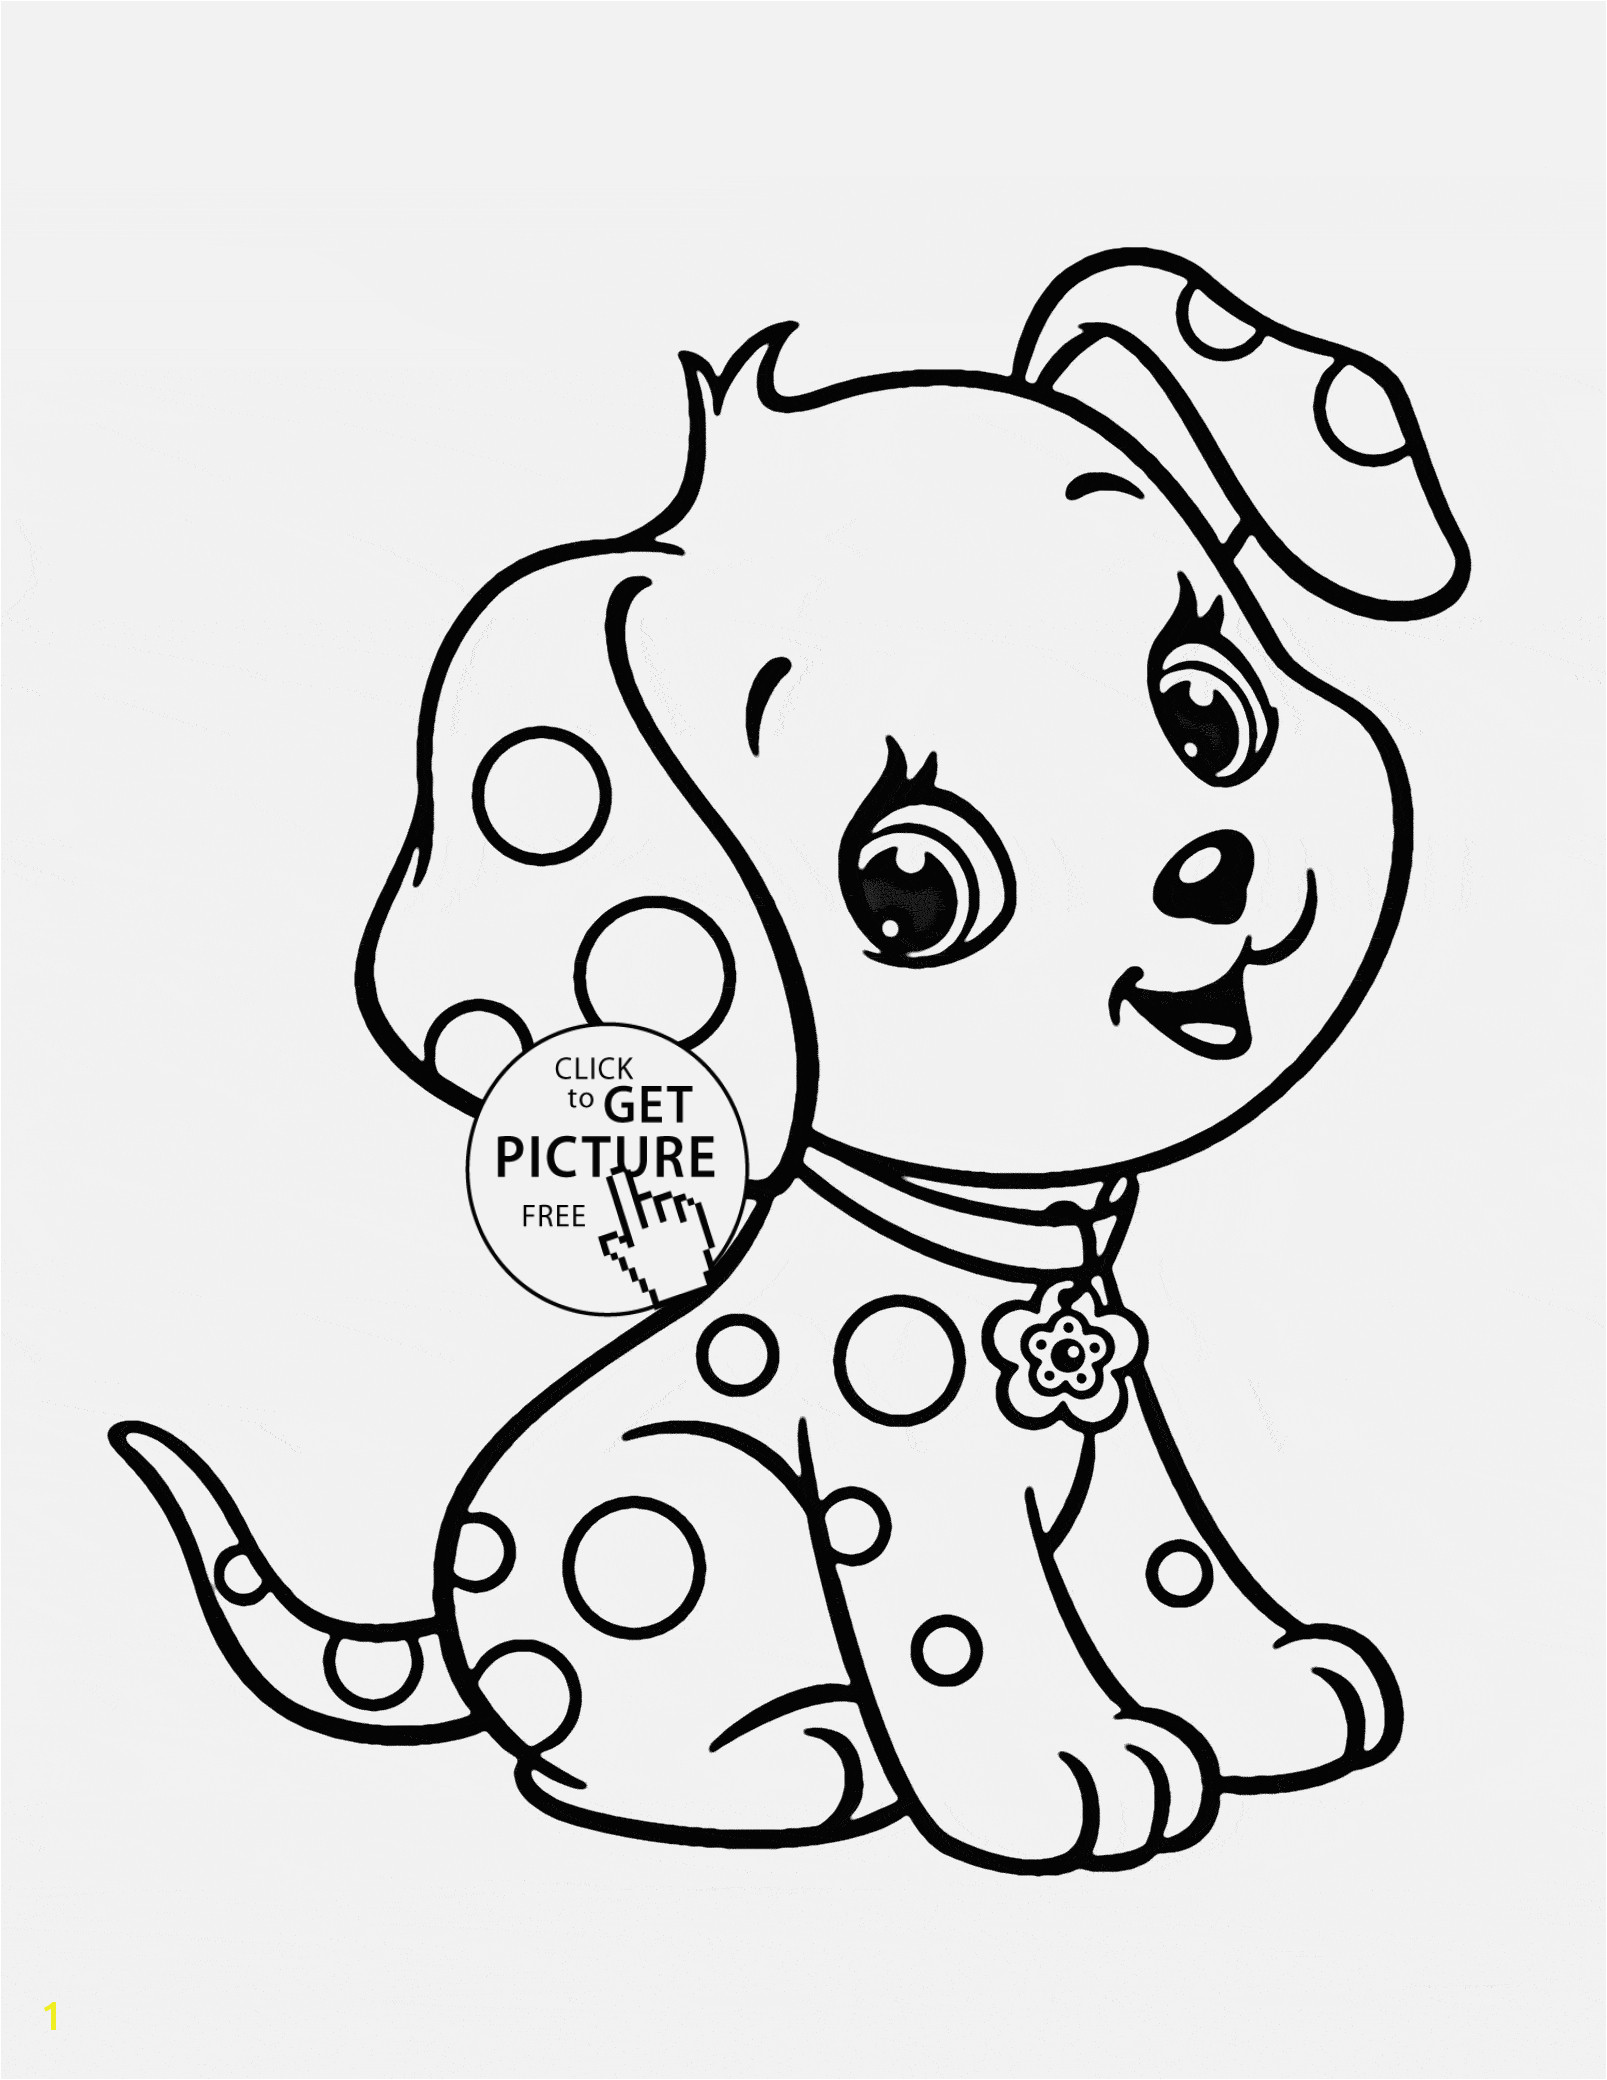 No Download Coloring Pages 28 Free Animal Coloring Pages for Kids Download